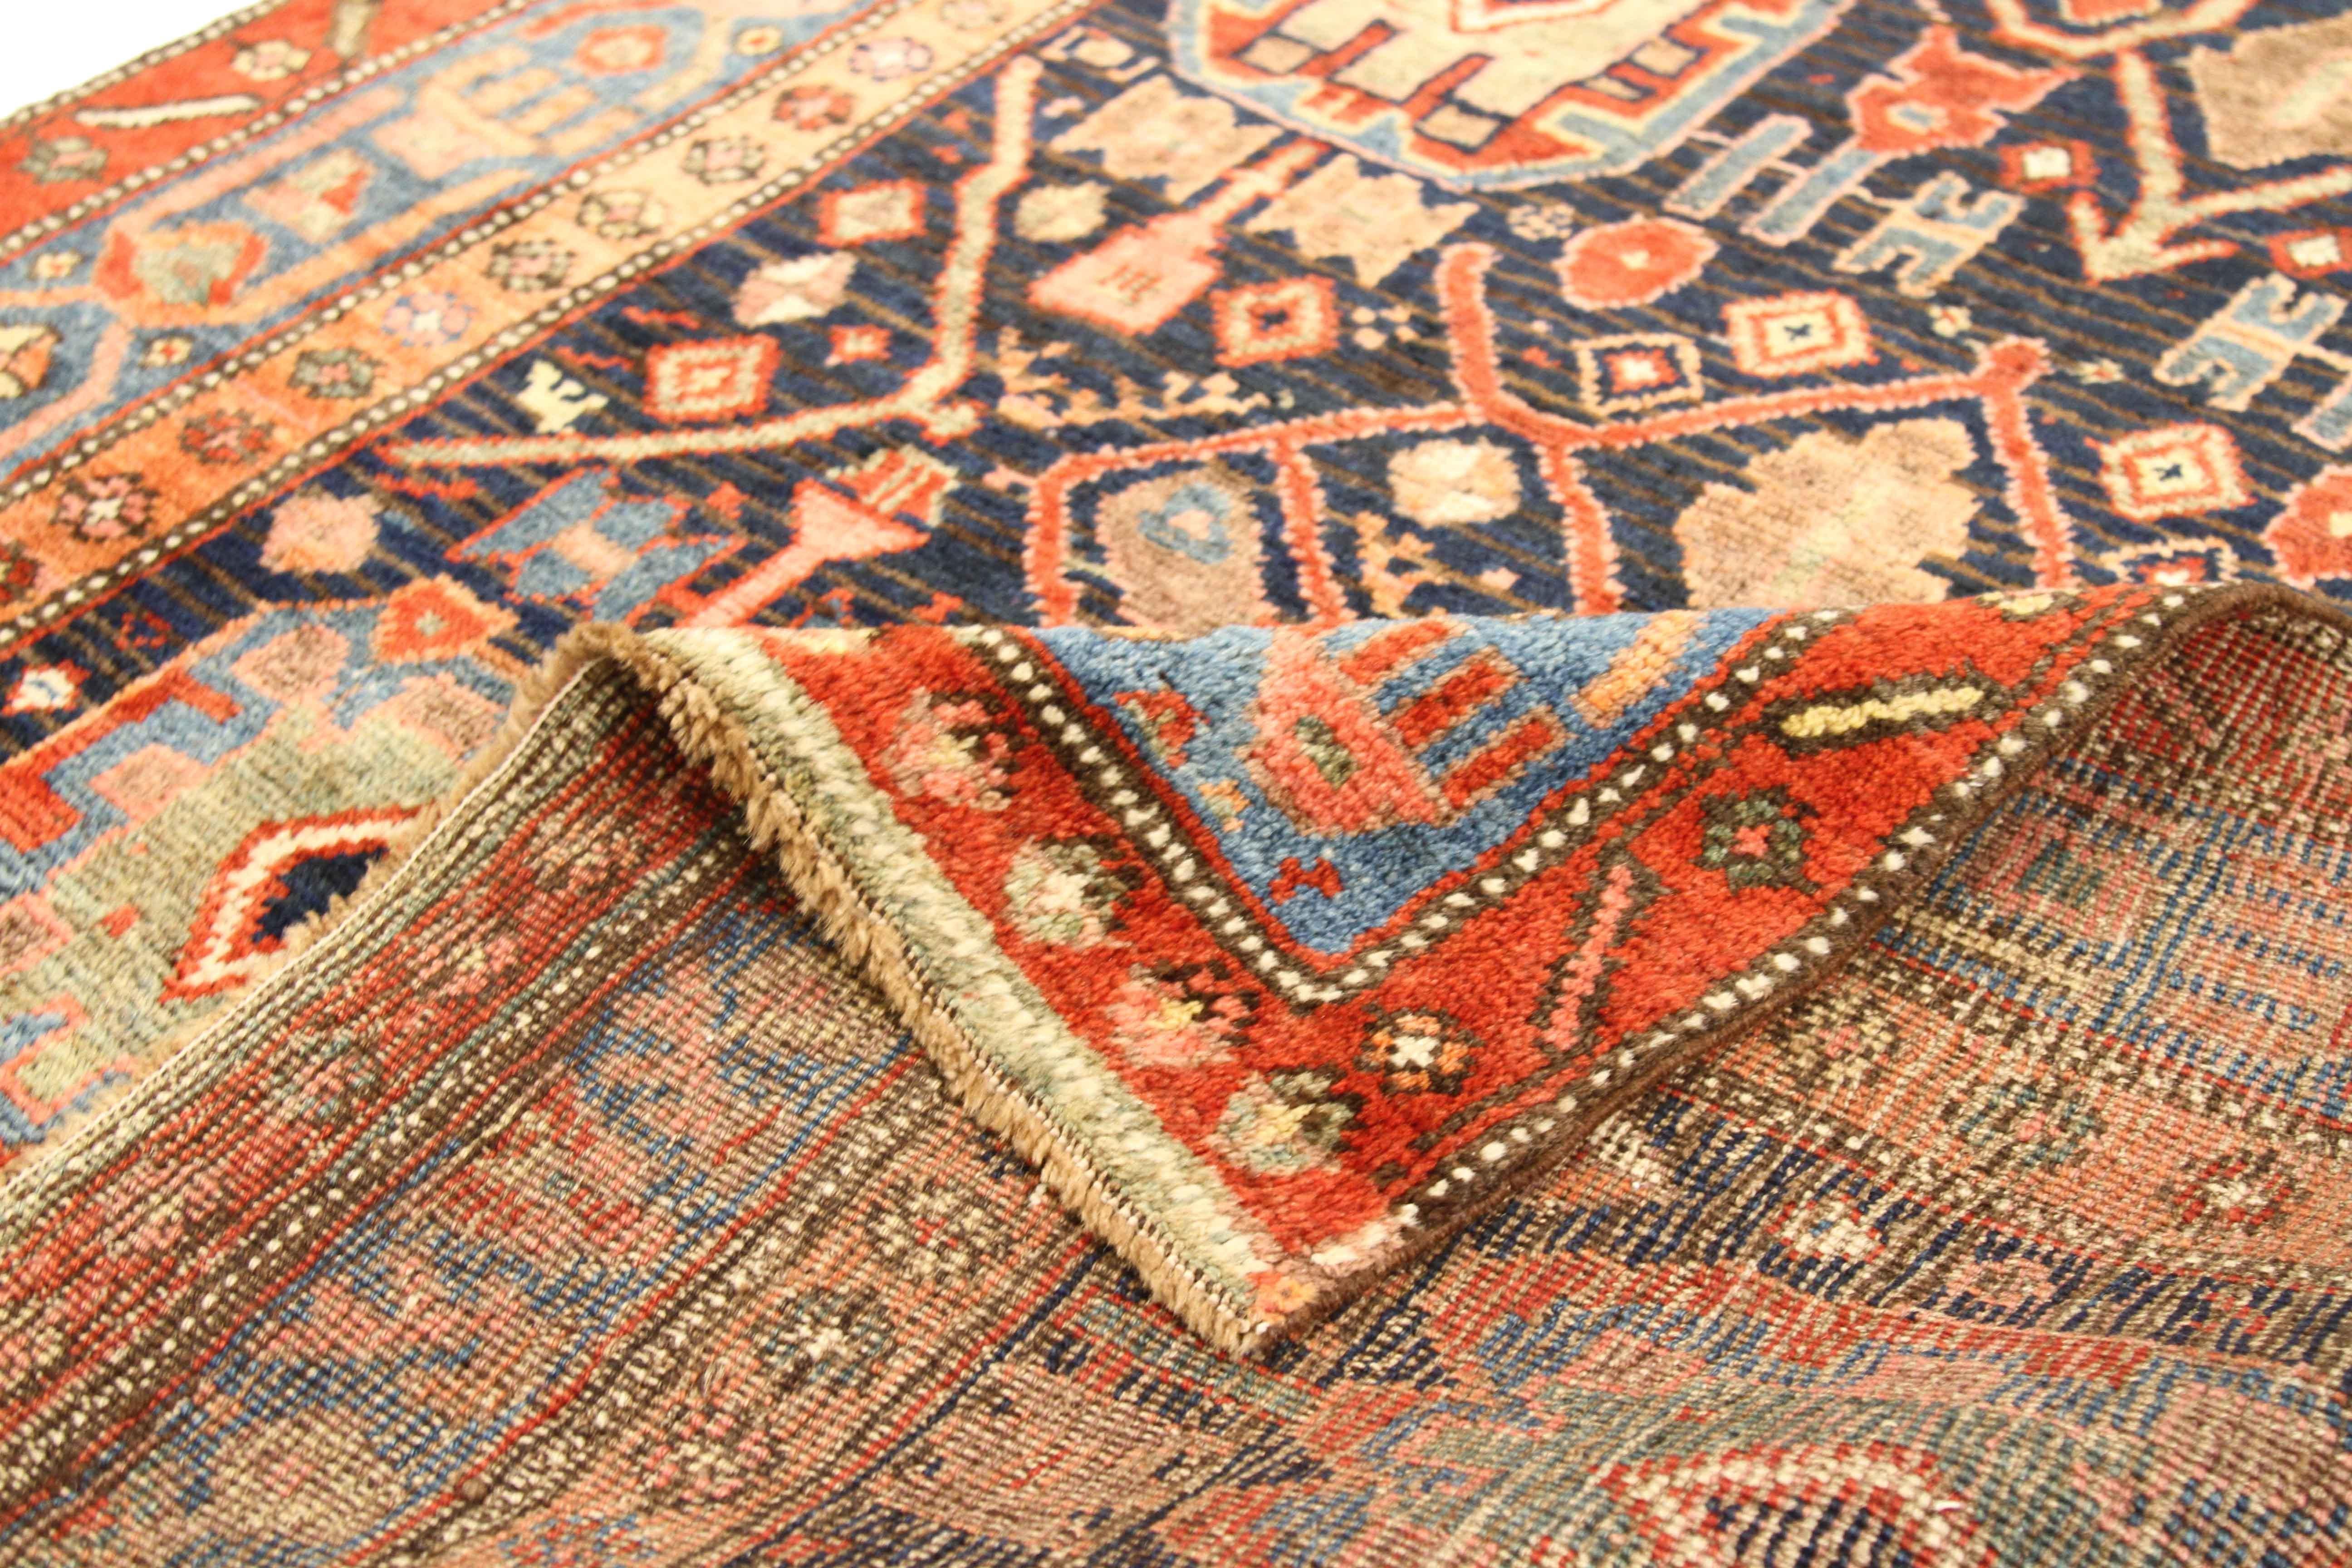 Made in the 1910s, this Persian rug is a certified antique piece woven by hand using the finest wool and dyes. Tribal patterns indigenous to weavers in Bijar fill the entire field of the carpet along with floral borders that provide an excellent